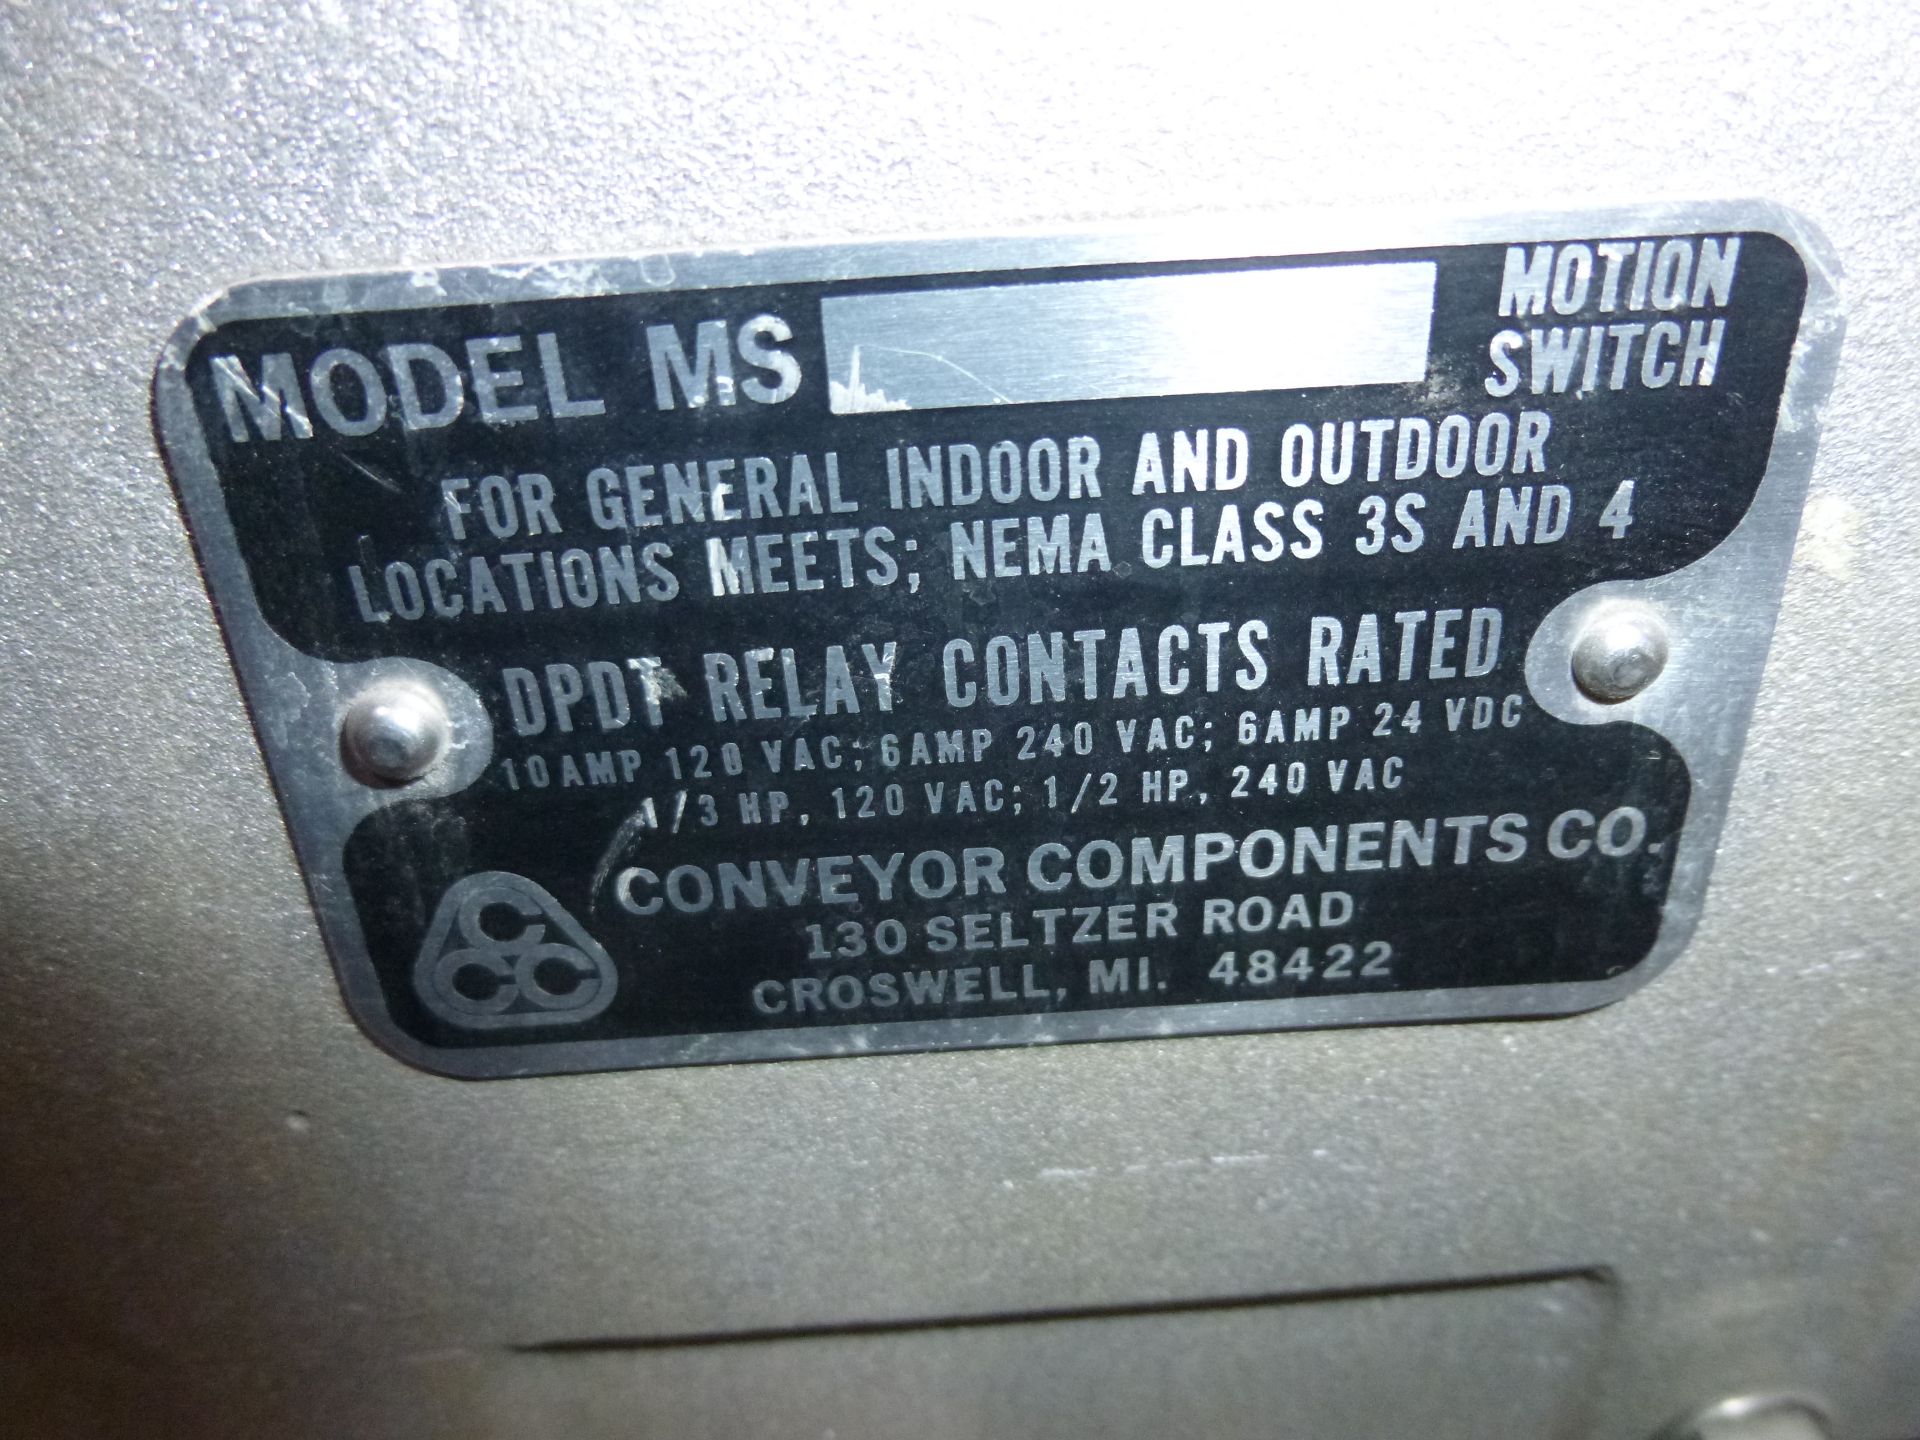 Qty 2 Conveyor Components Model MS motion switches, new, show minor shelf wear, as always with - Image 2 of 2